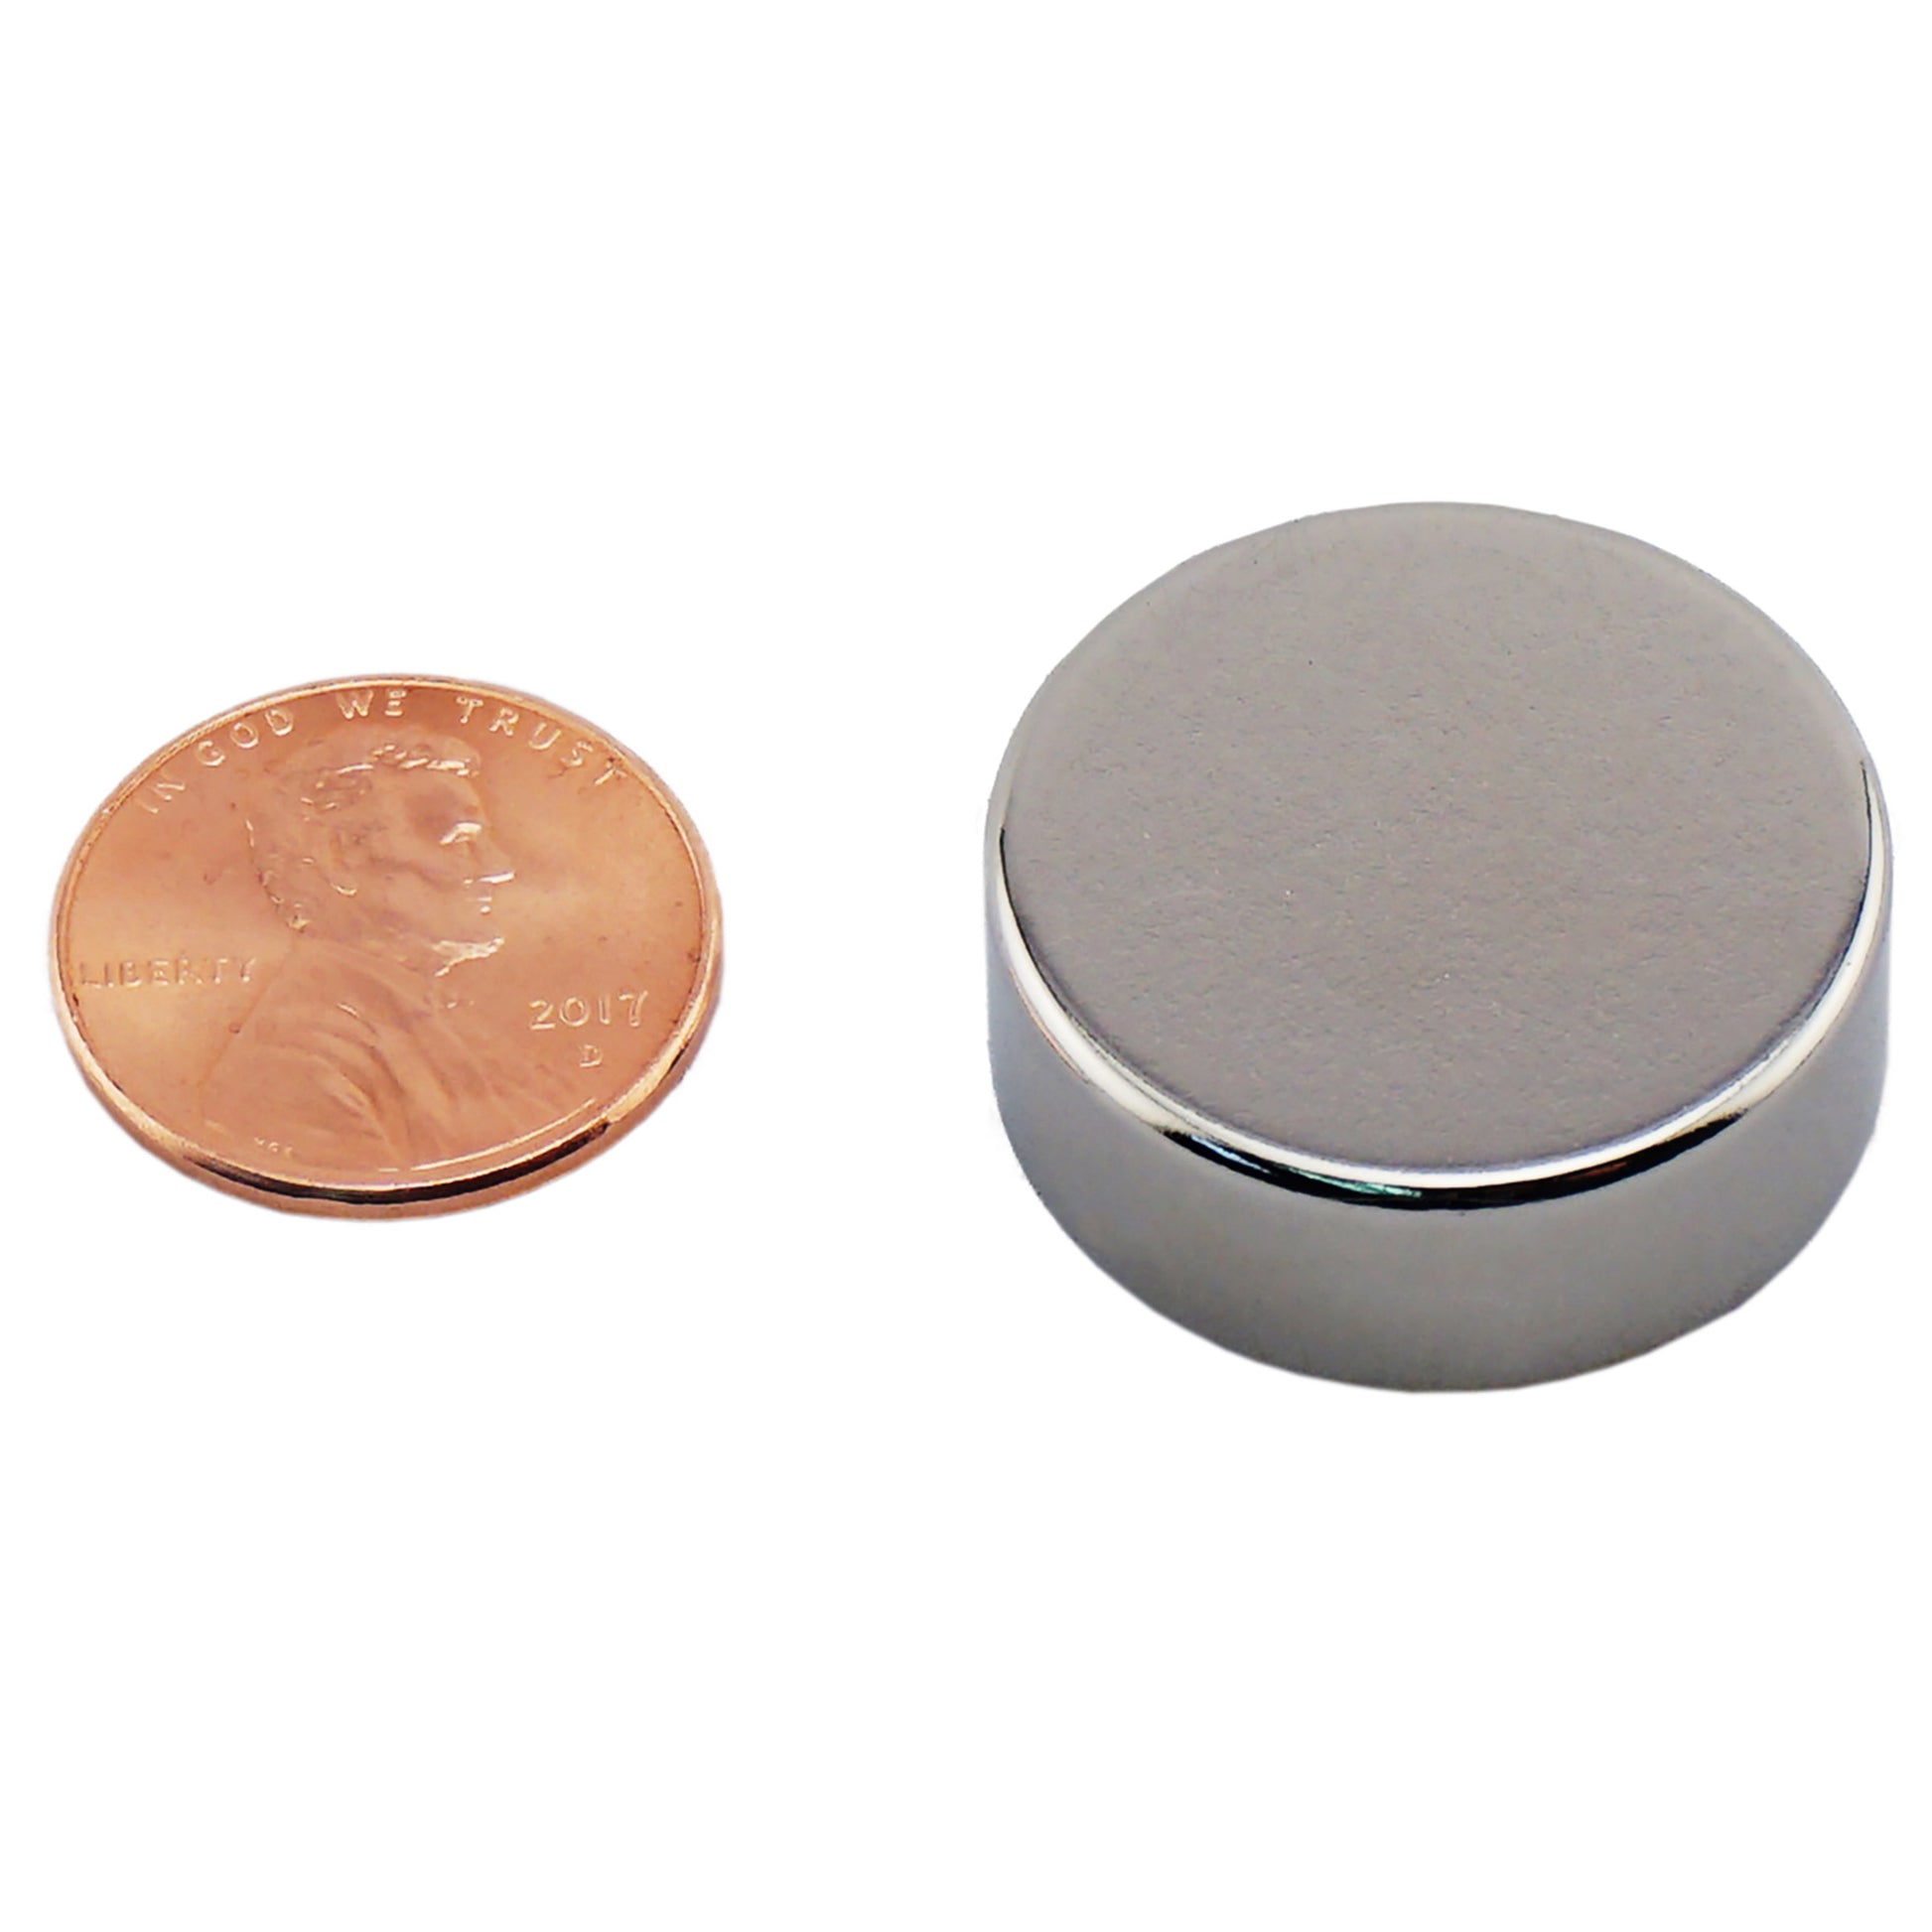 Load image into Gallery viewer, ND010015N Neodymium Disc Magnet - Compared to Penny for Size Reference